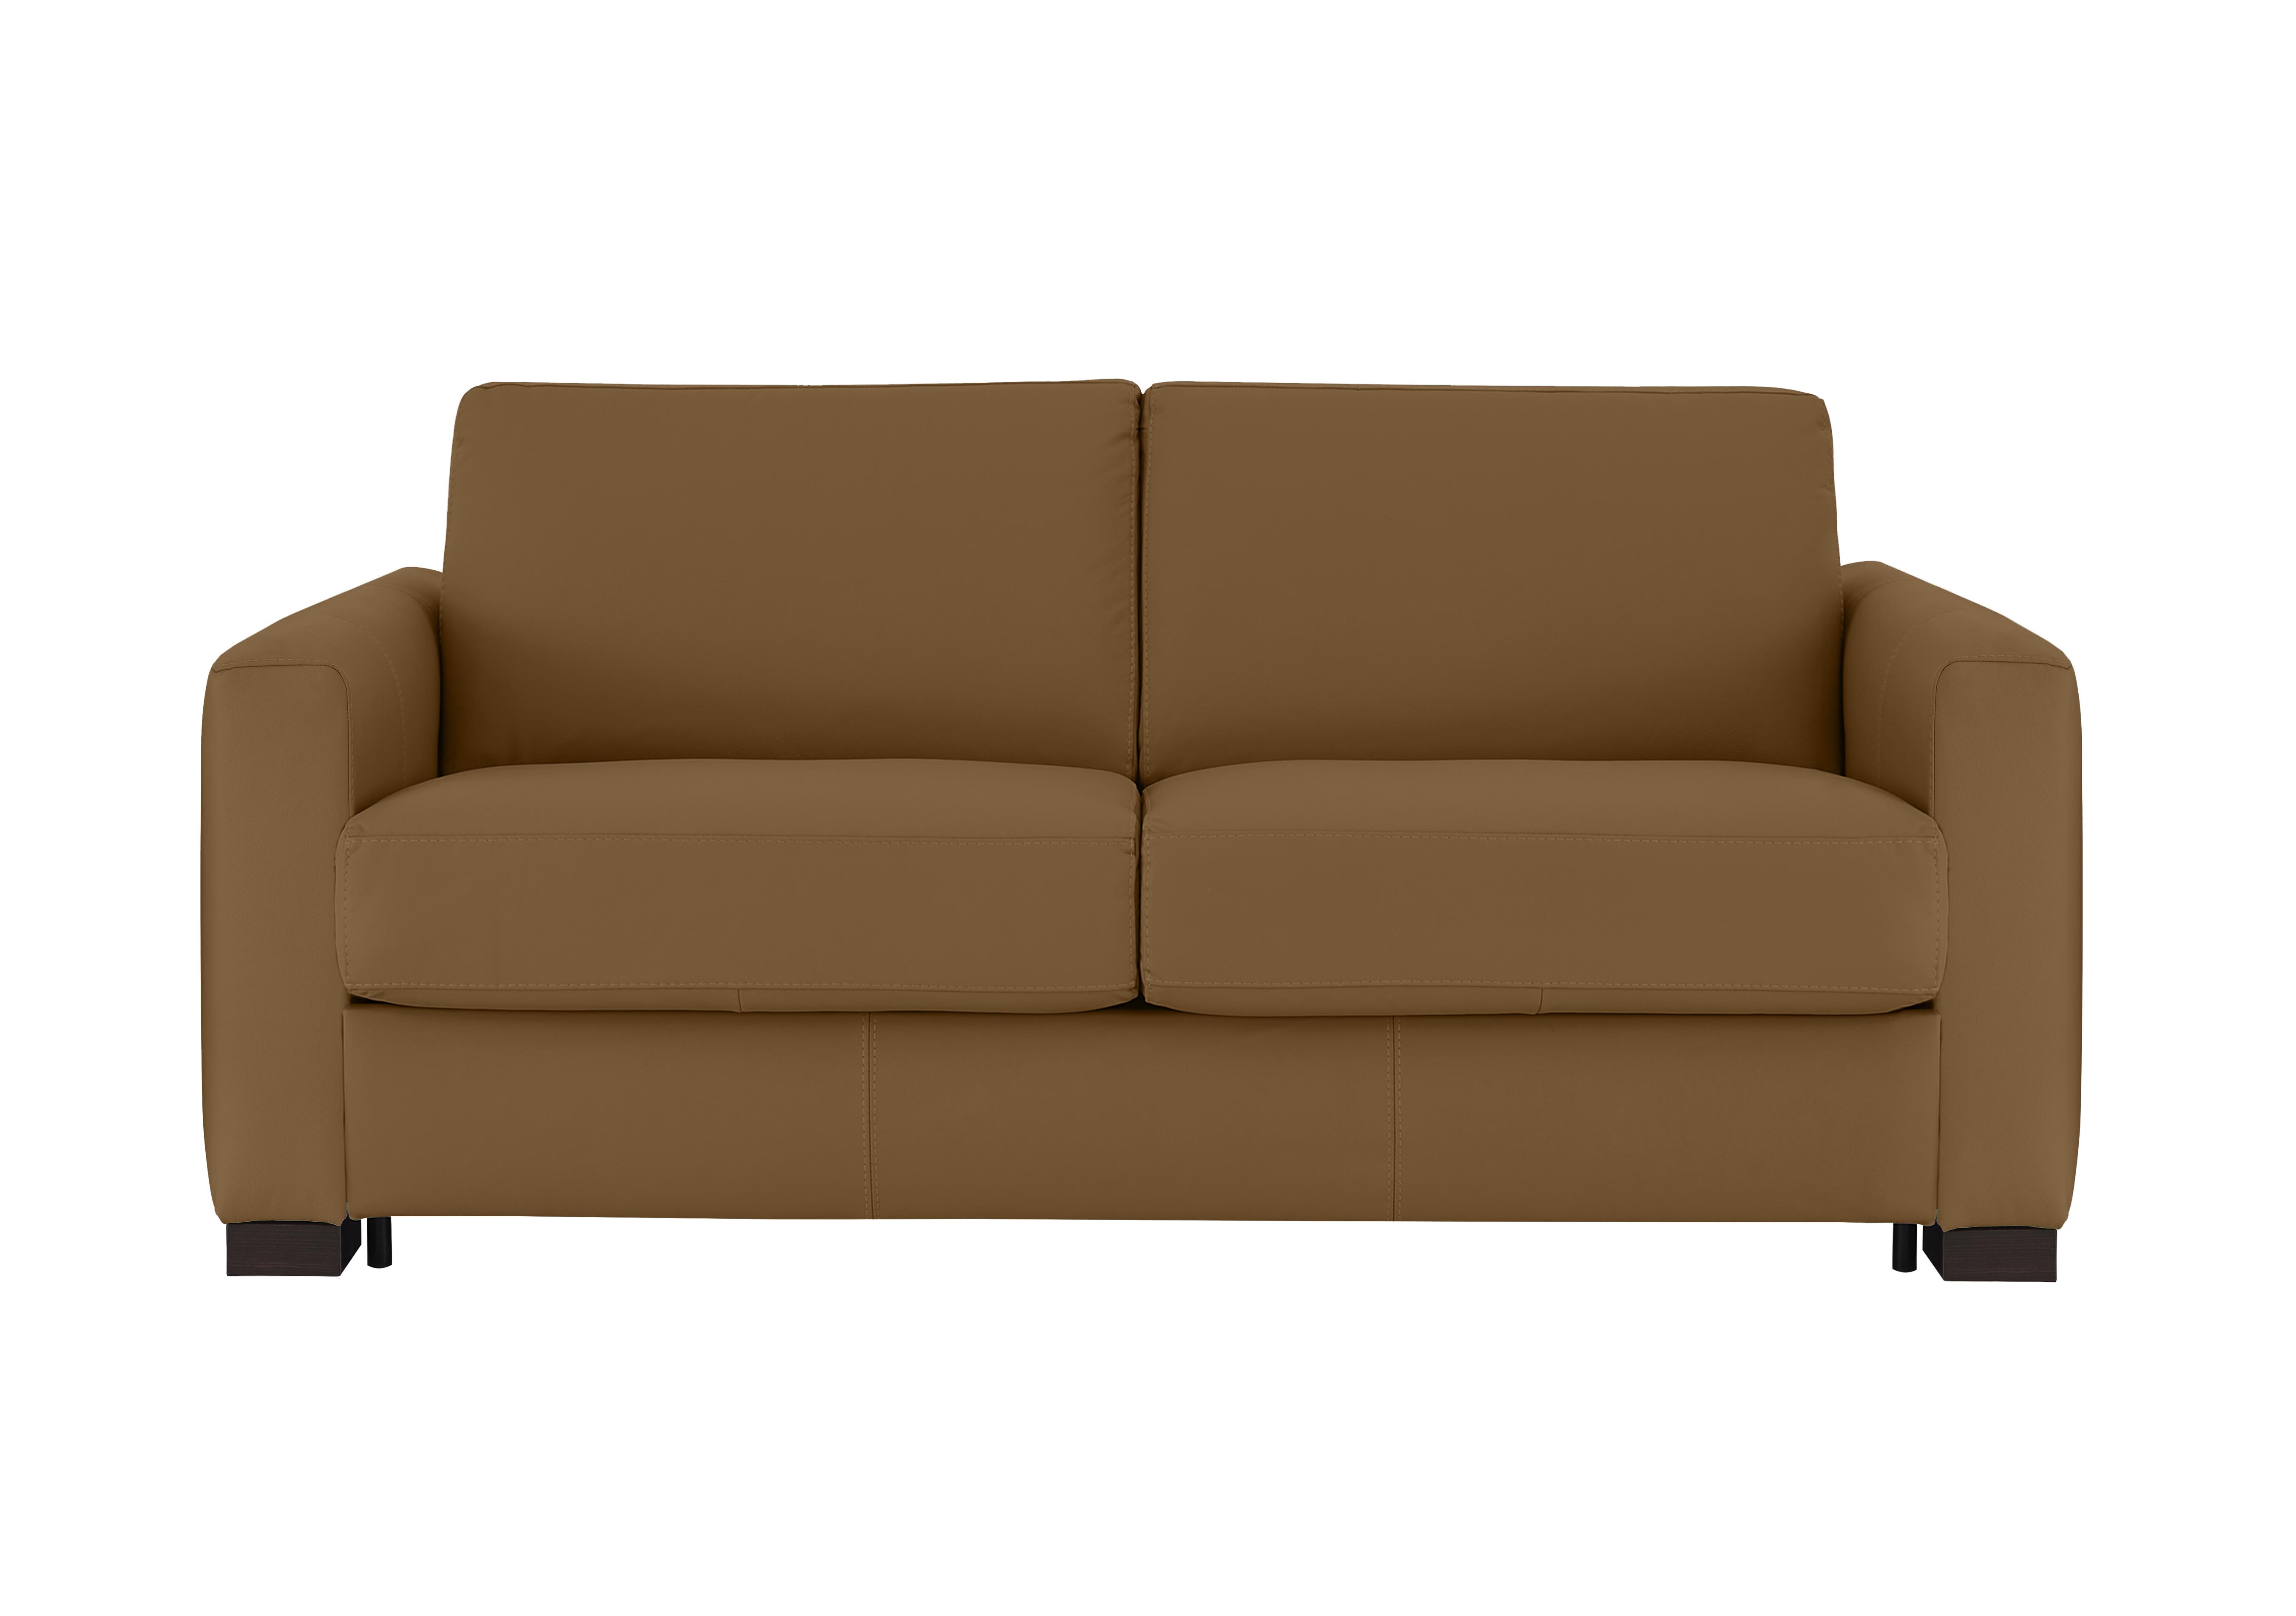 Alcova 2.5 Seater Leather Sofa Bed with Box Arms in Botero Cuoio 2151 on Furniture Village